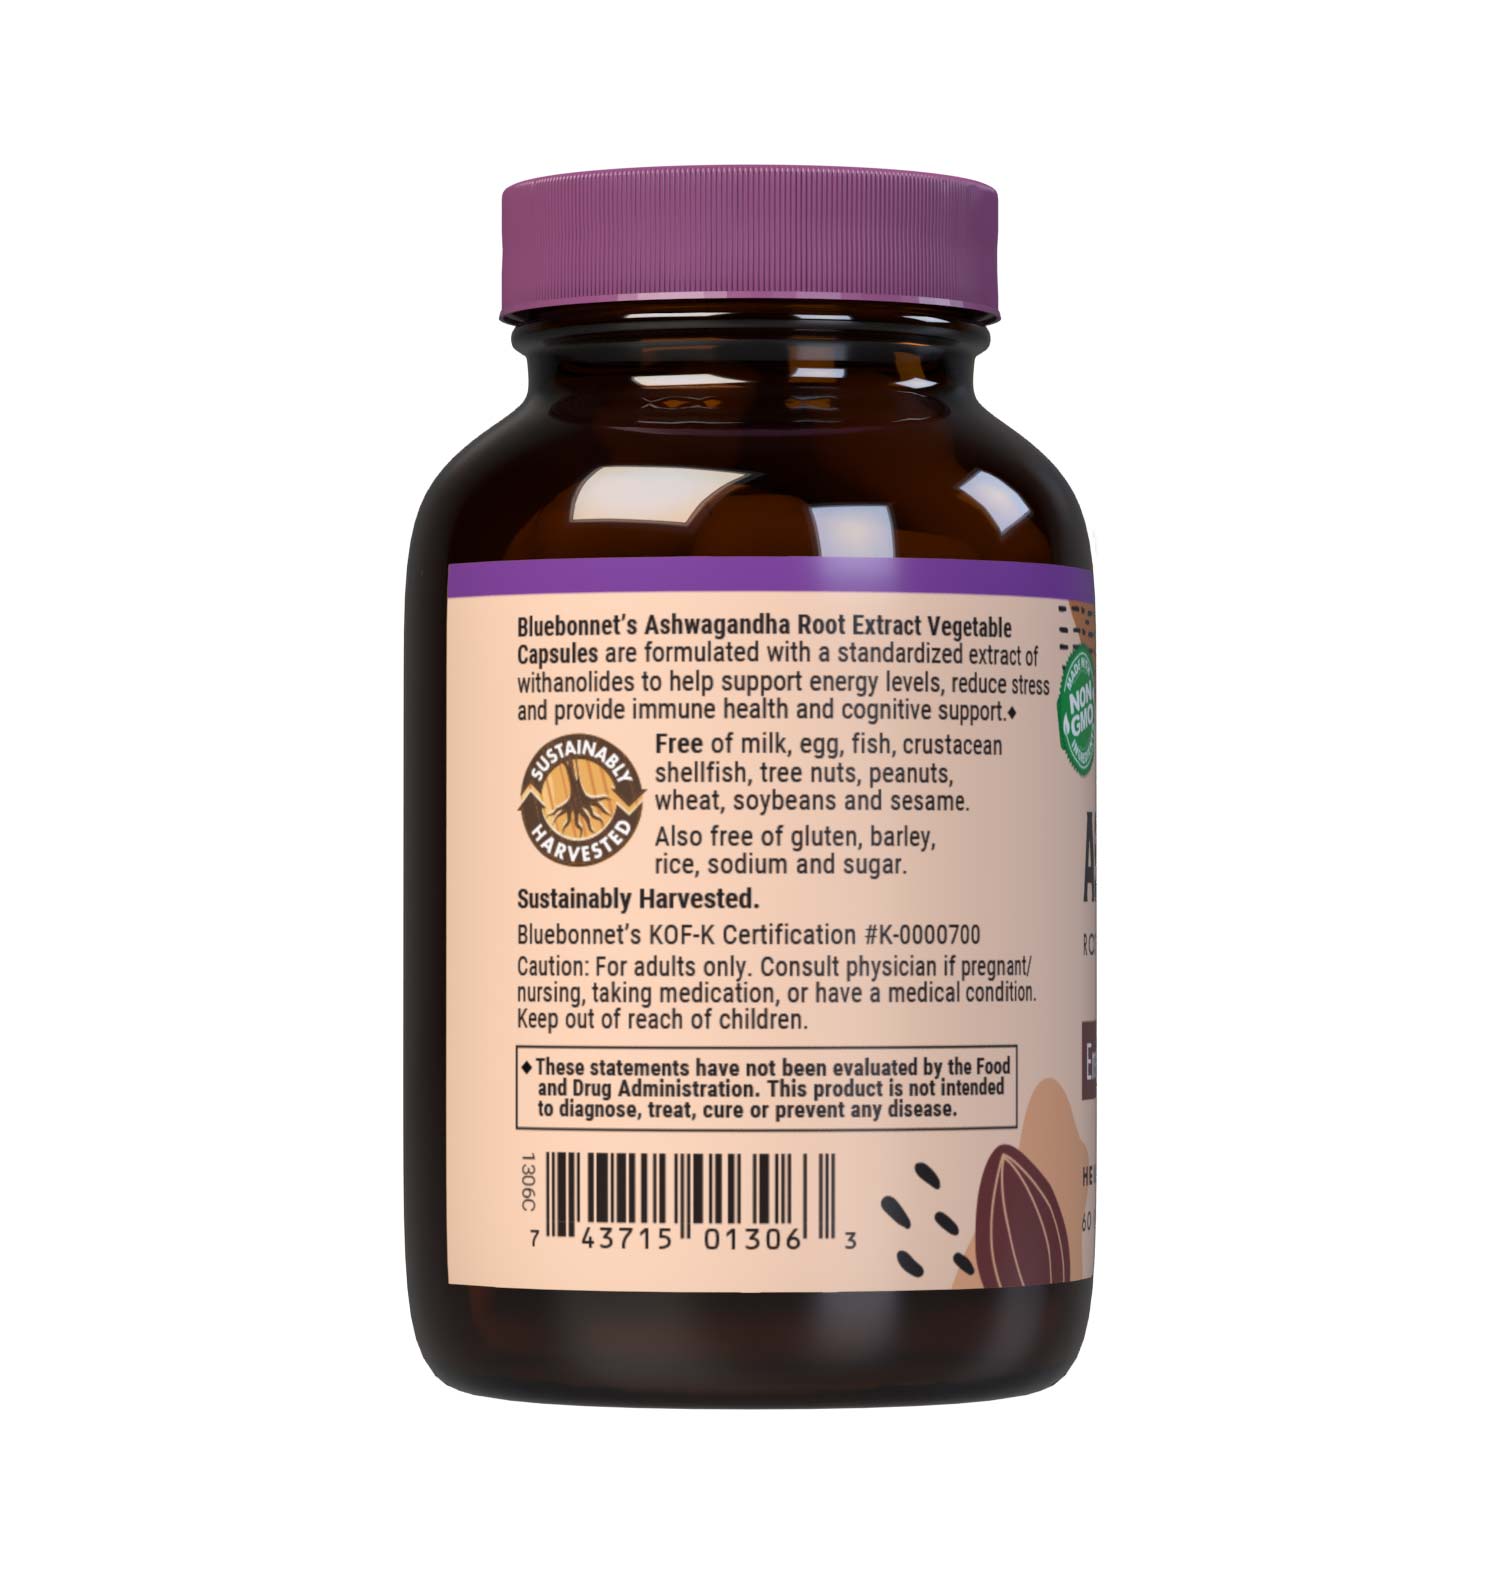 Bluebonnet’s Ashwagandha Root Extract 60 Vegetable Capsules are specially formulated with a standardized extract of withanolides from sustainably harvested, non-GMO ashwagandha root using a clean and gentle water-based extraction method. As the most researched active constituent in this Ayurvedic adaptogenic herb, withanolides are known to promote healthy energy levels while reducing stress and providing immune and cognitive support. Description panel. #size_60 count